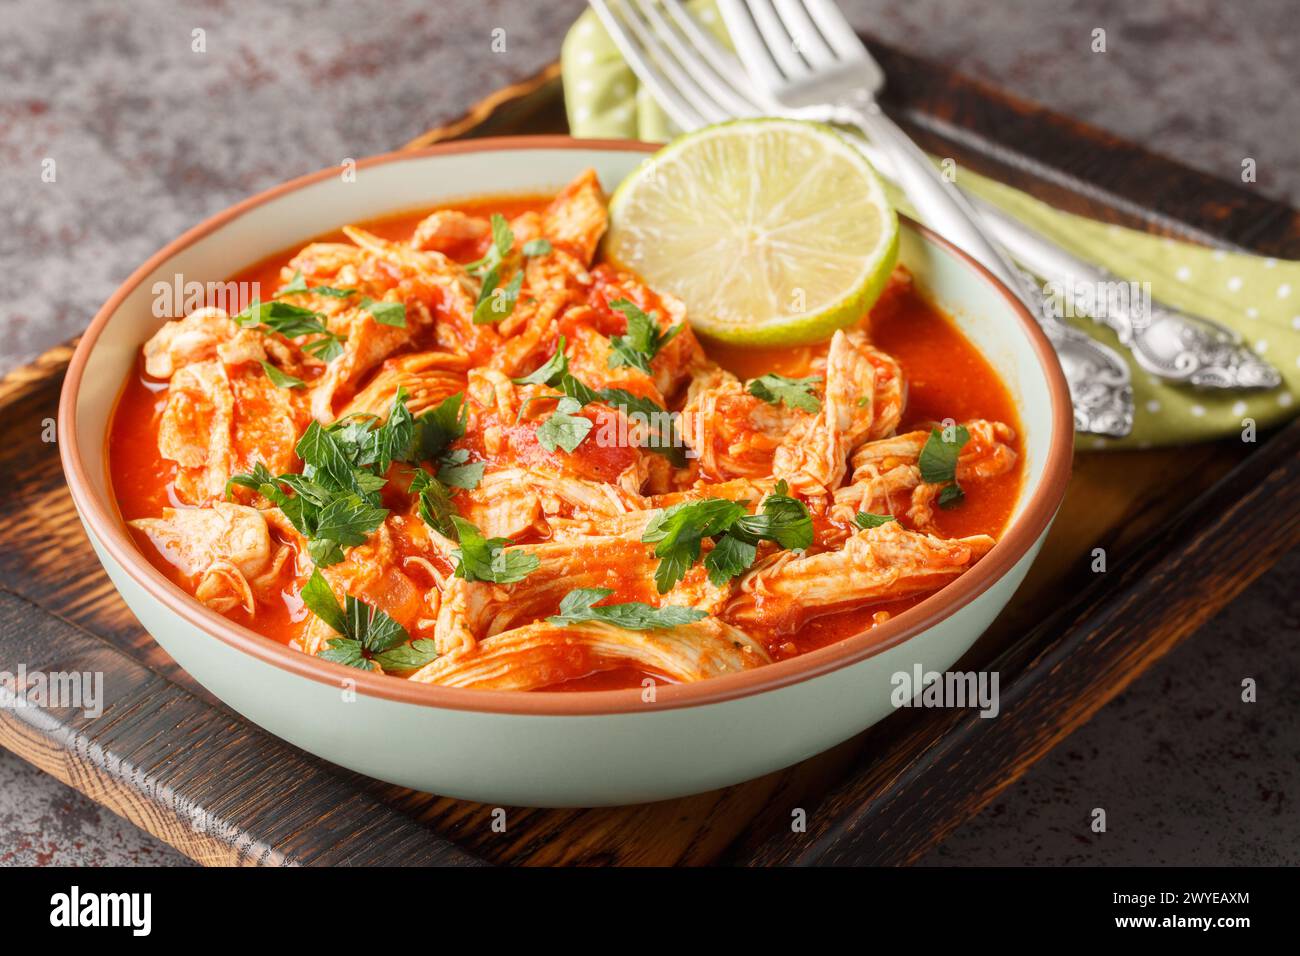 Mexican Baked shredded Chicken and tomato salsa close-up in a bowl on a wooden board. Horizontal Stock Photo